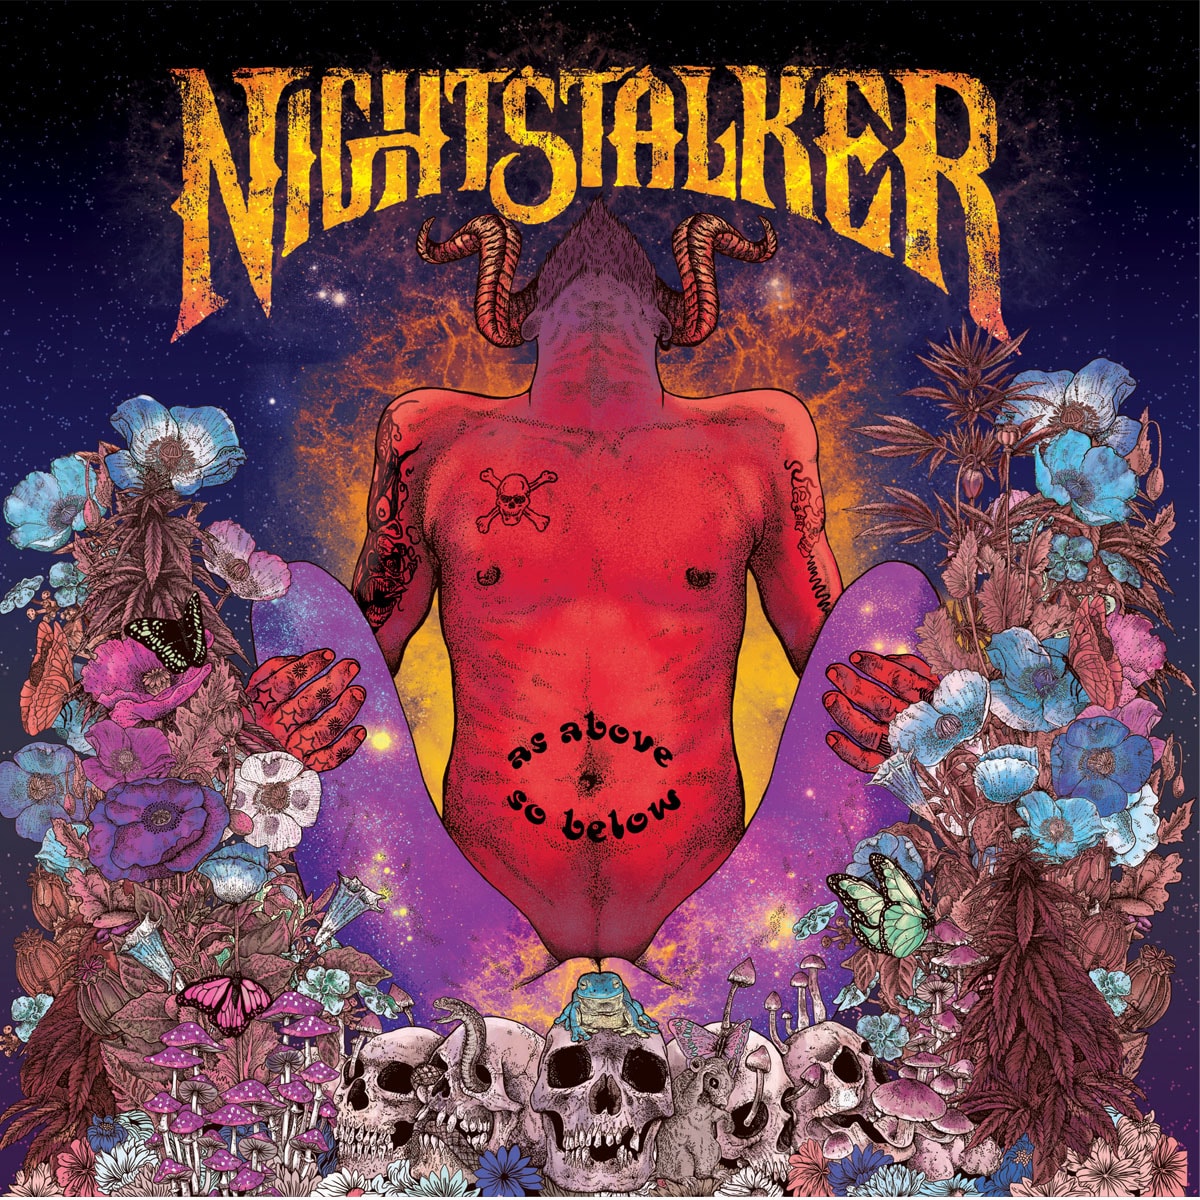 Read more about the article NIGHTSTALKER – As above, so below